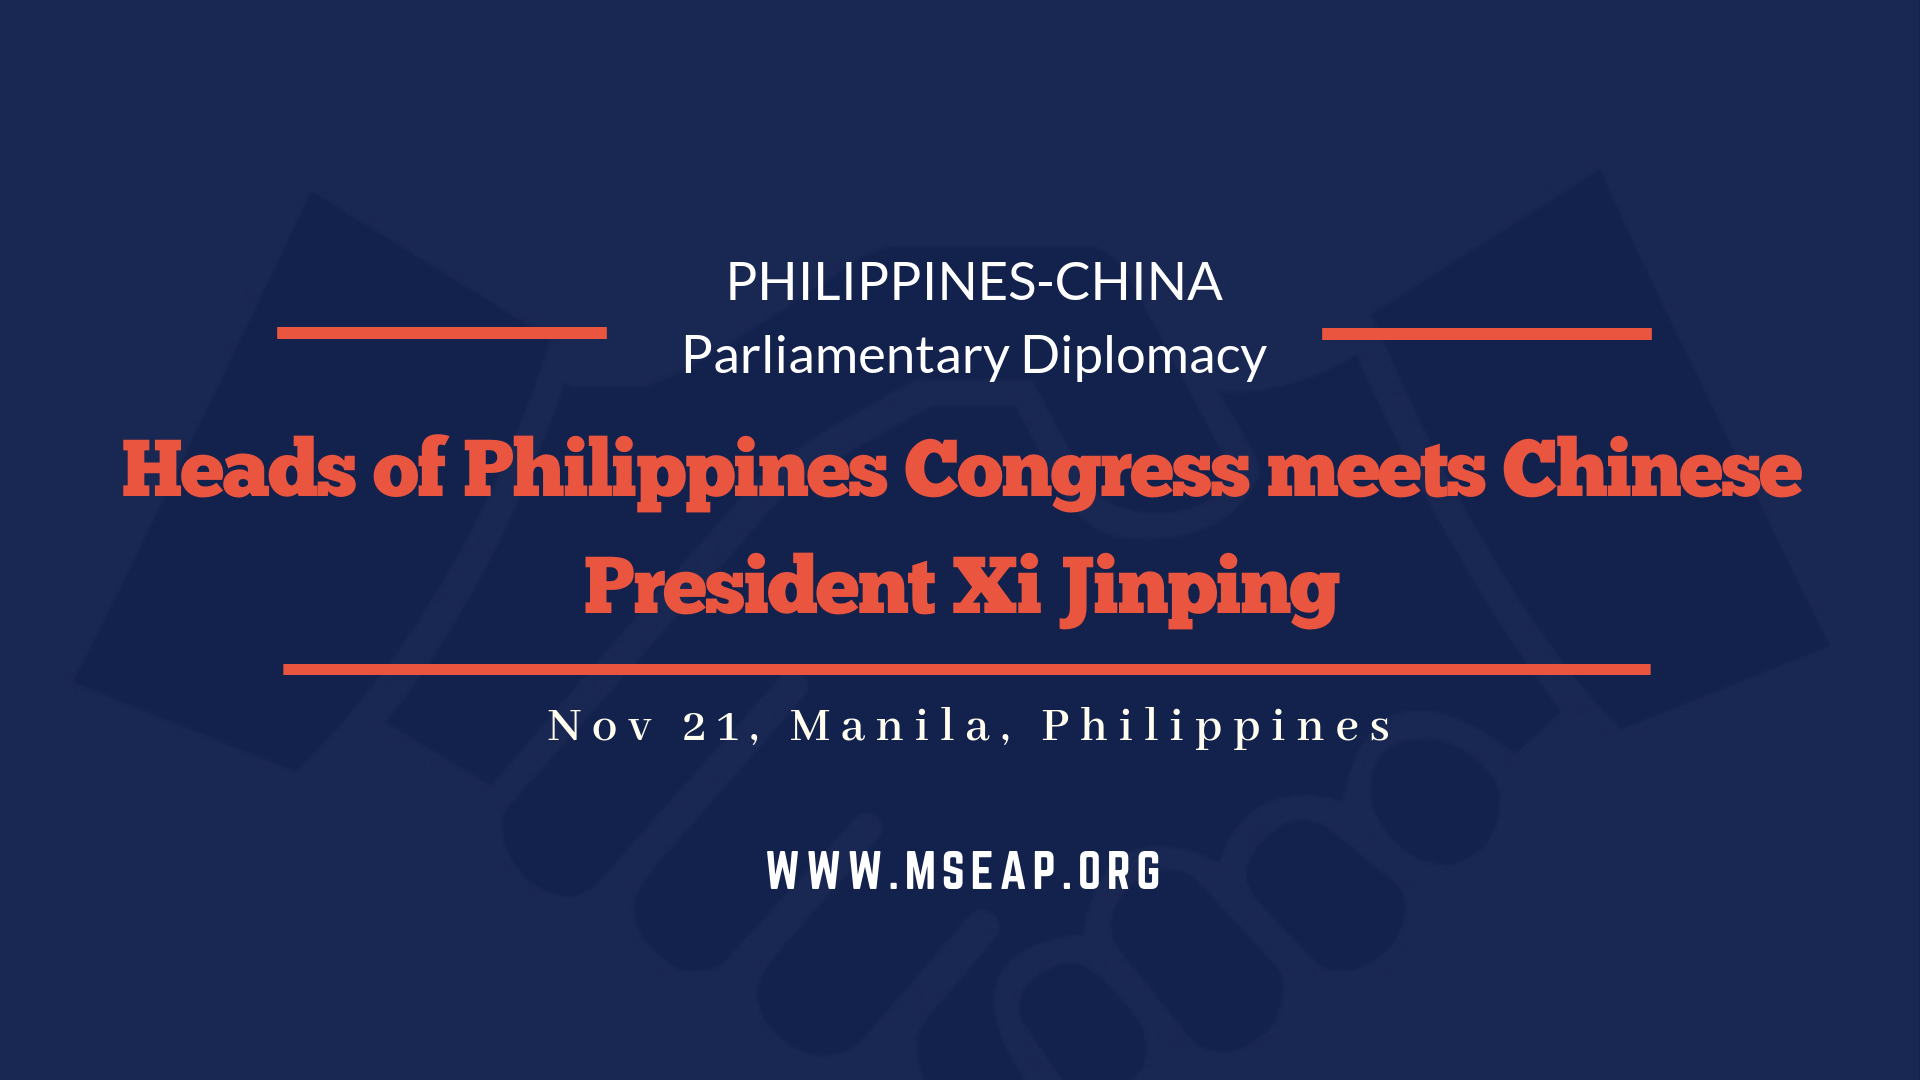 Heads of Philippines Congress meets Chinese President Xi Jinping